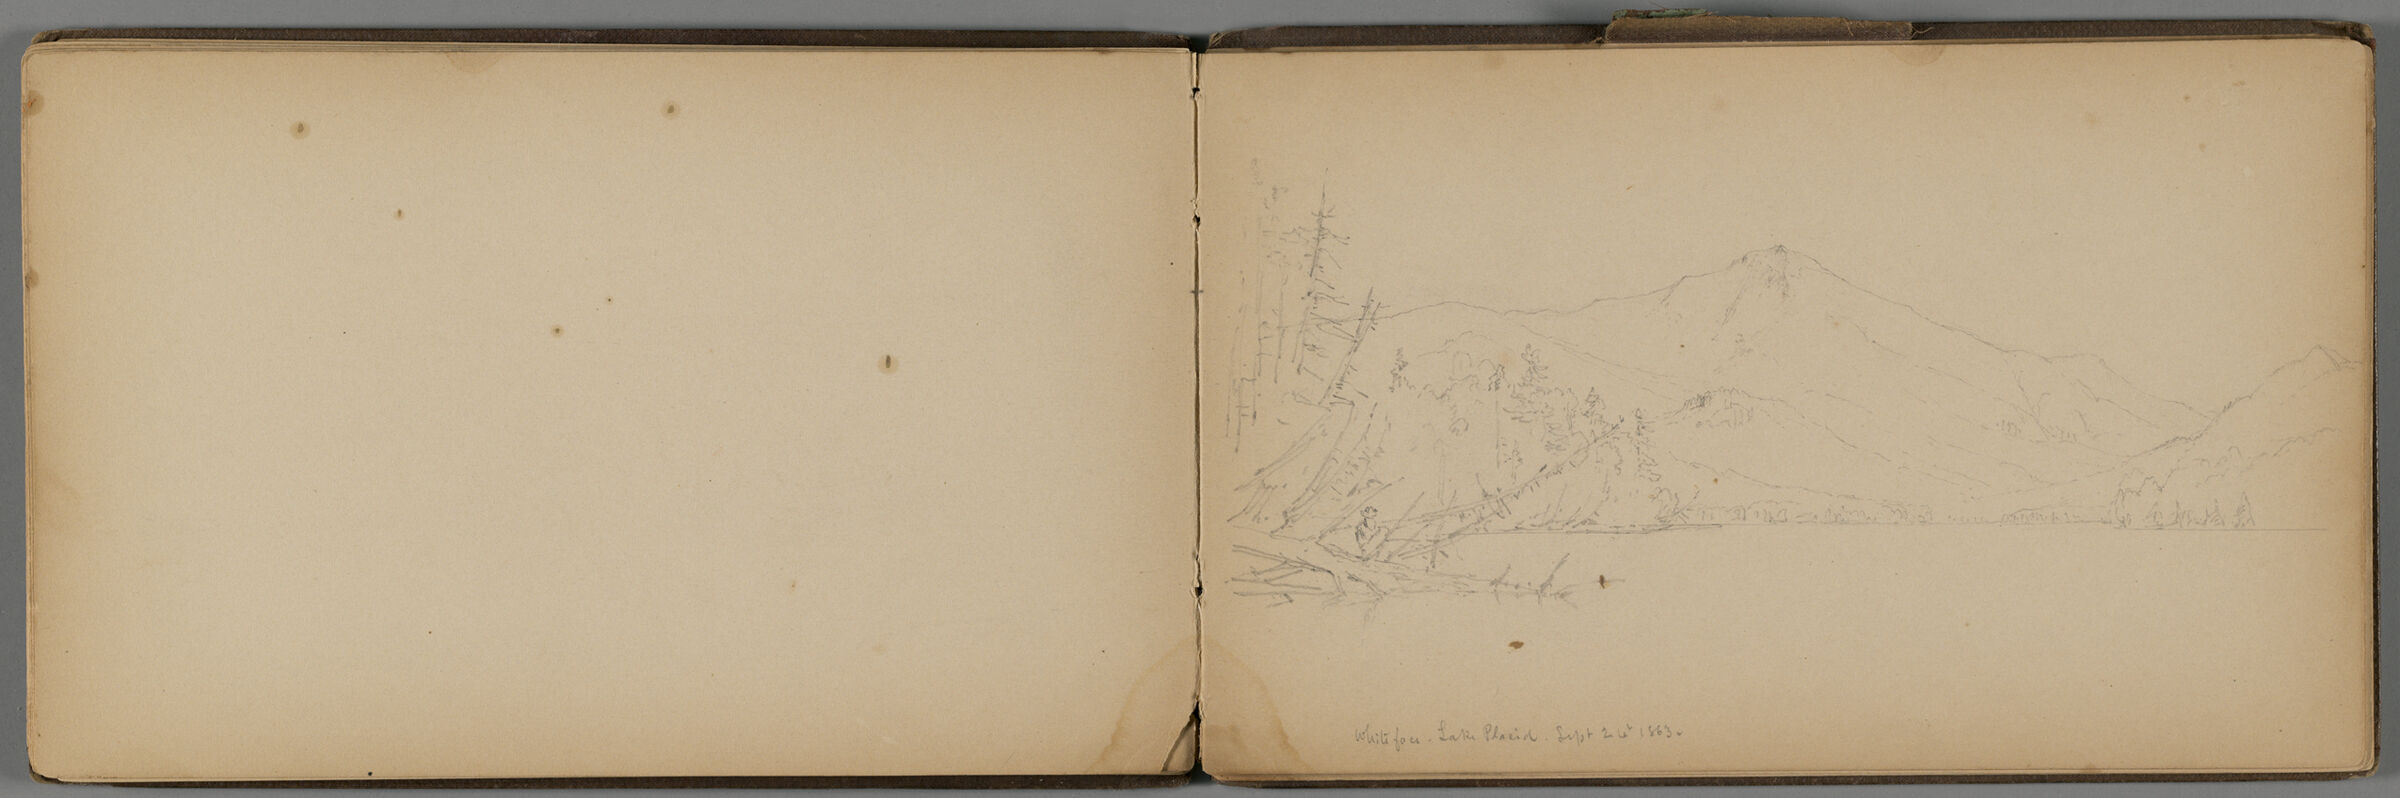 Whiteface Mountain, New York; Verso: Partial View Of Lake Placid, New York